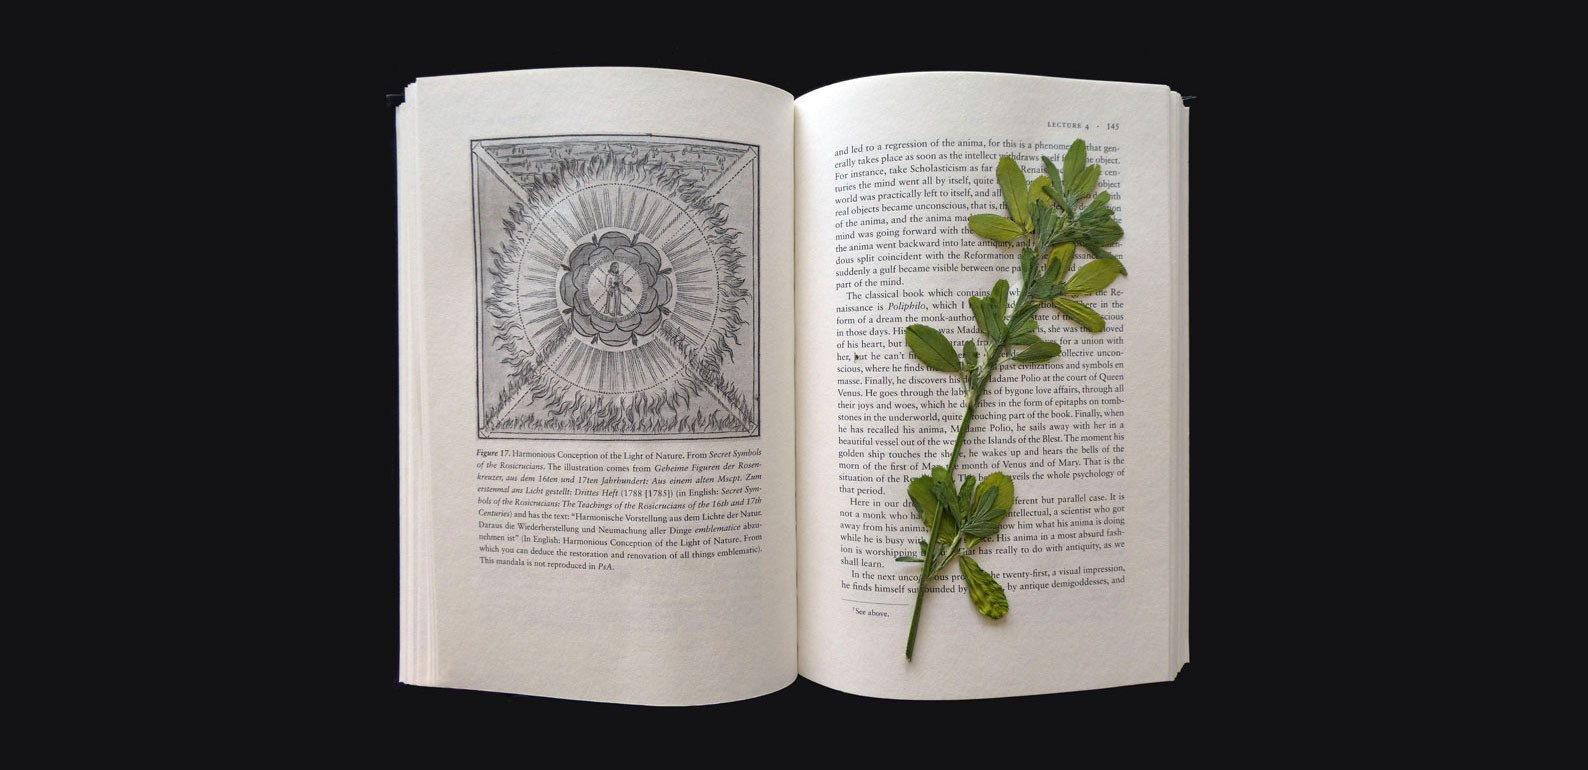 Suzanne Treister, Scientific Dreaming: a photographs of a wild flower from within the area of the Large Hadron Collider (LHC) at CERN, Geneva, and from the alpine meadows outside the CERN area, pressed inside pages of 'Dream Symbols of the Individuation Process: Notes of C. G. Jung's Seminars on Wolfgang Pauli's Dreams'